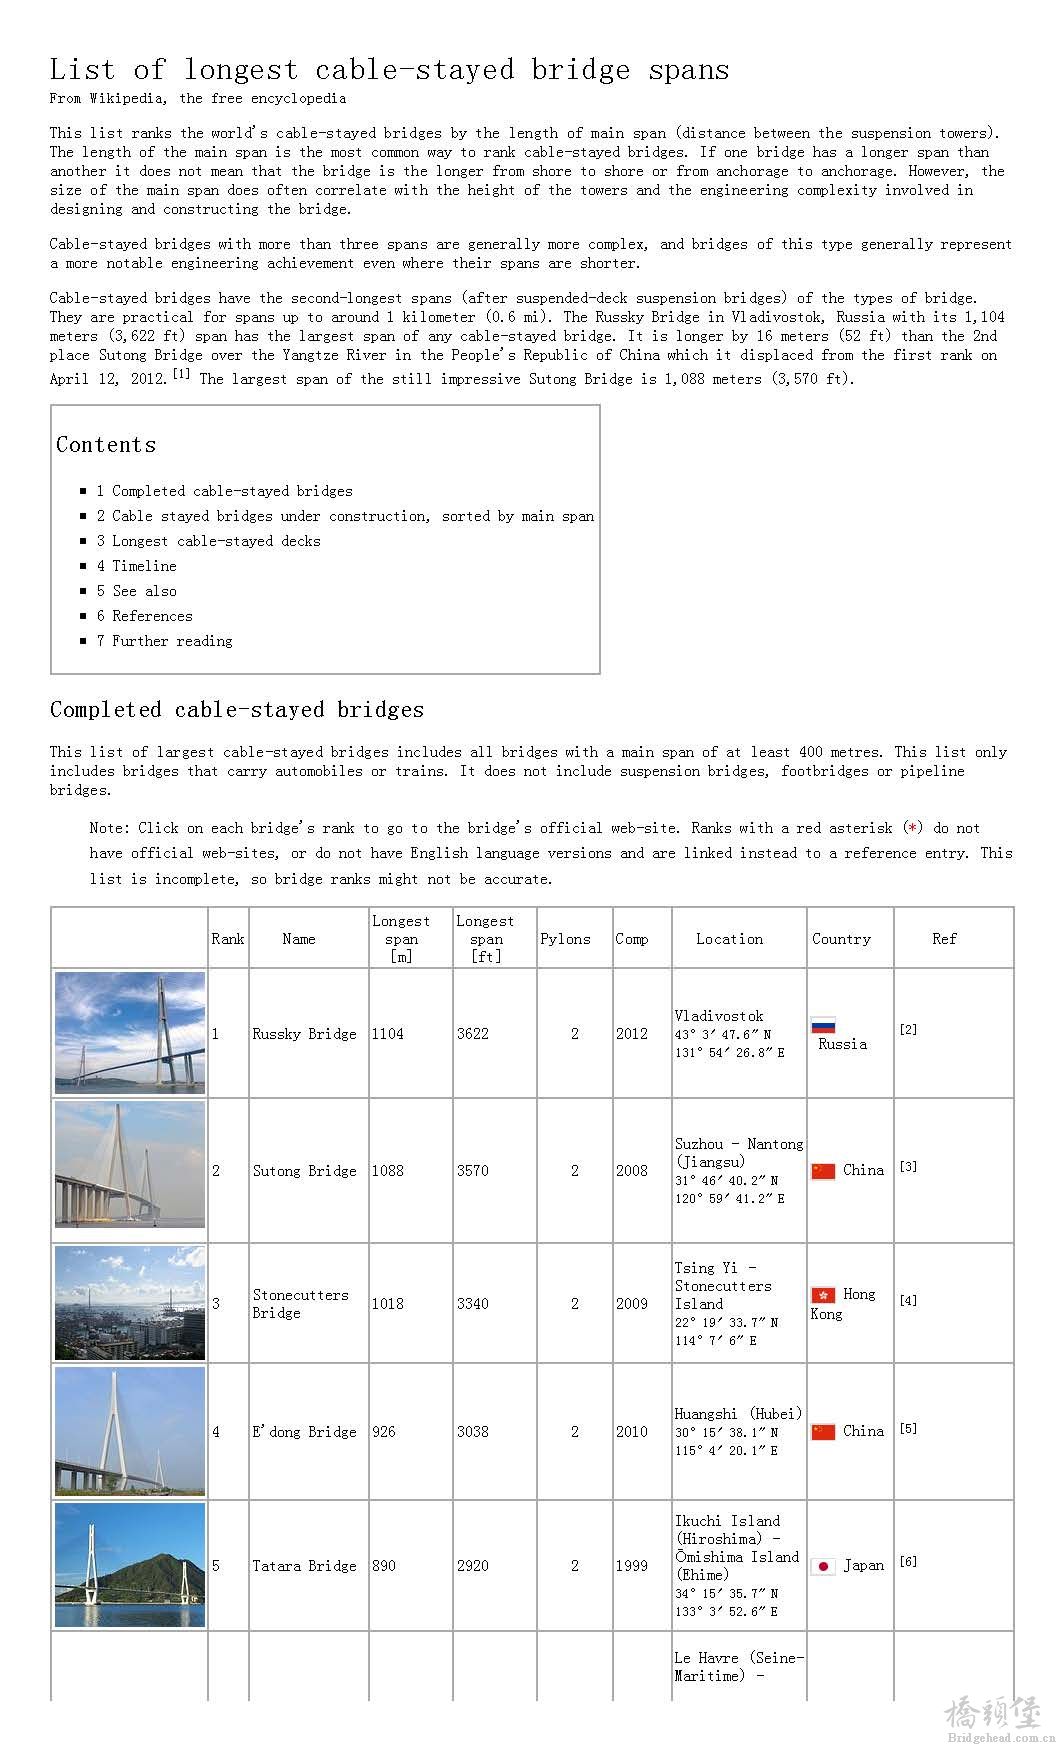 List of longest cable-stayed bridge spans - Wikipedia, the free encyclopedia_页面_01.jpg